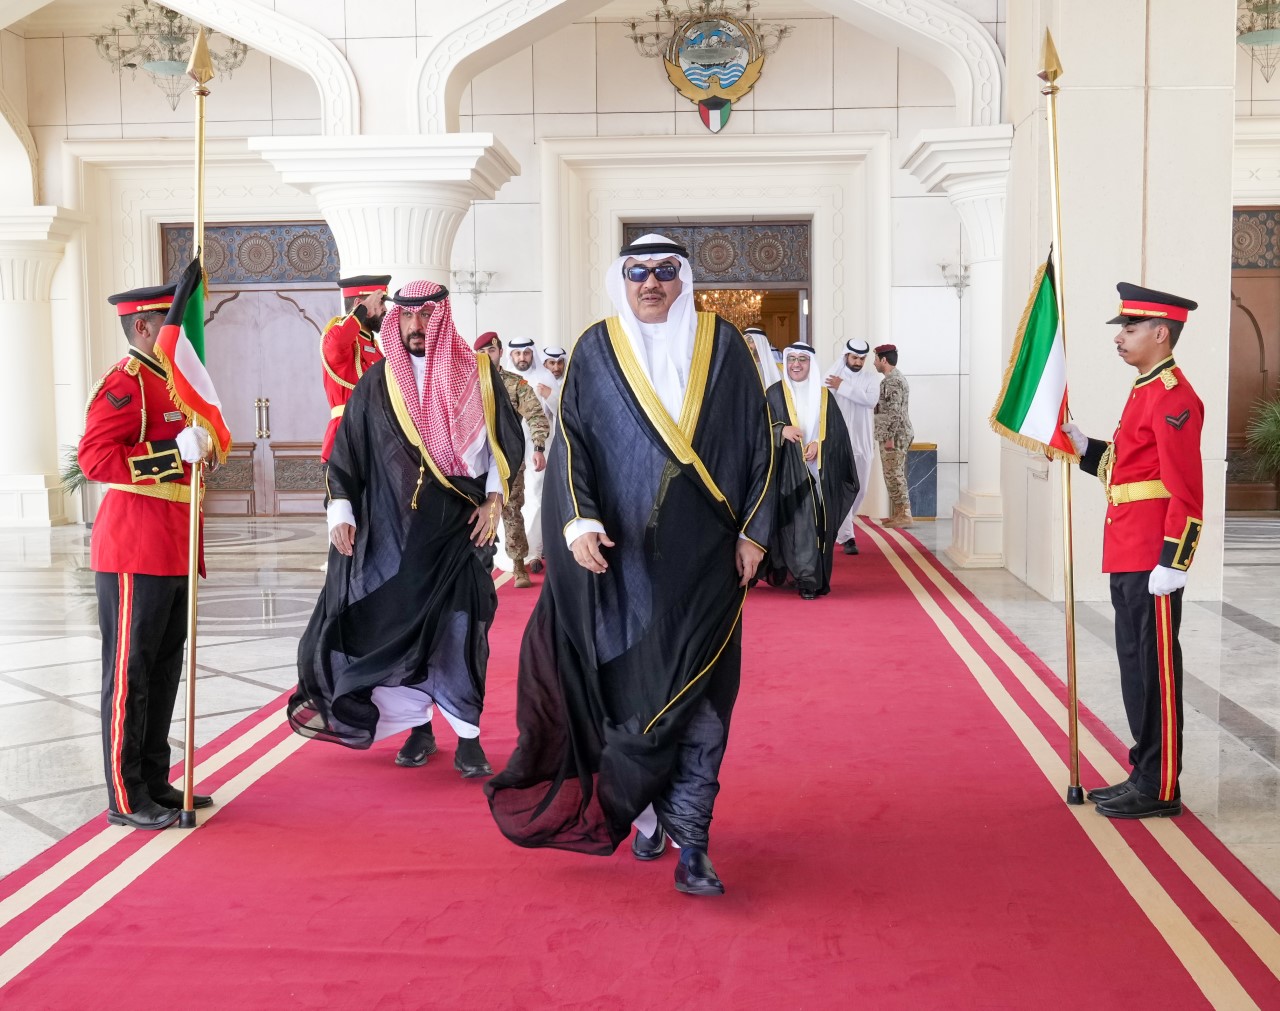 Representing His Highness the Amir, His Highness Prime Minister Sheikh Sabah Khaled Al-Hamad Al-Sabah heads to UAE for condolence